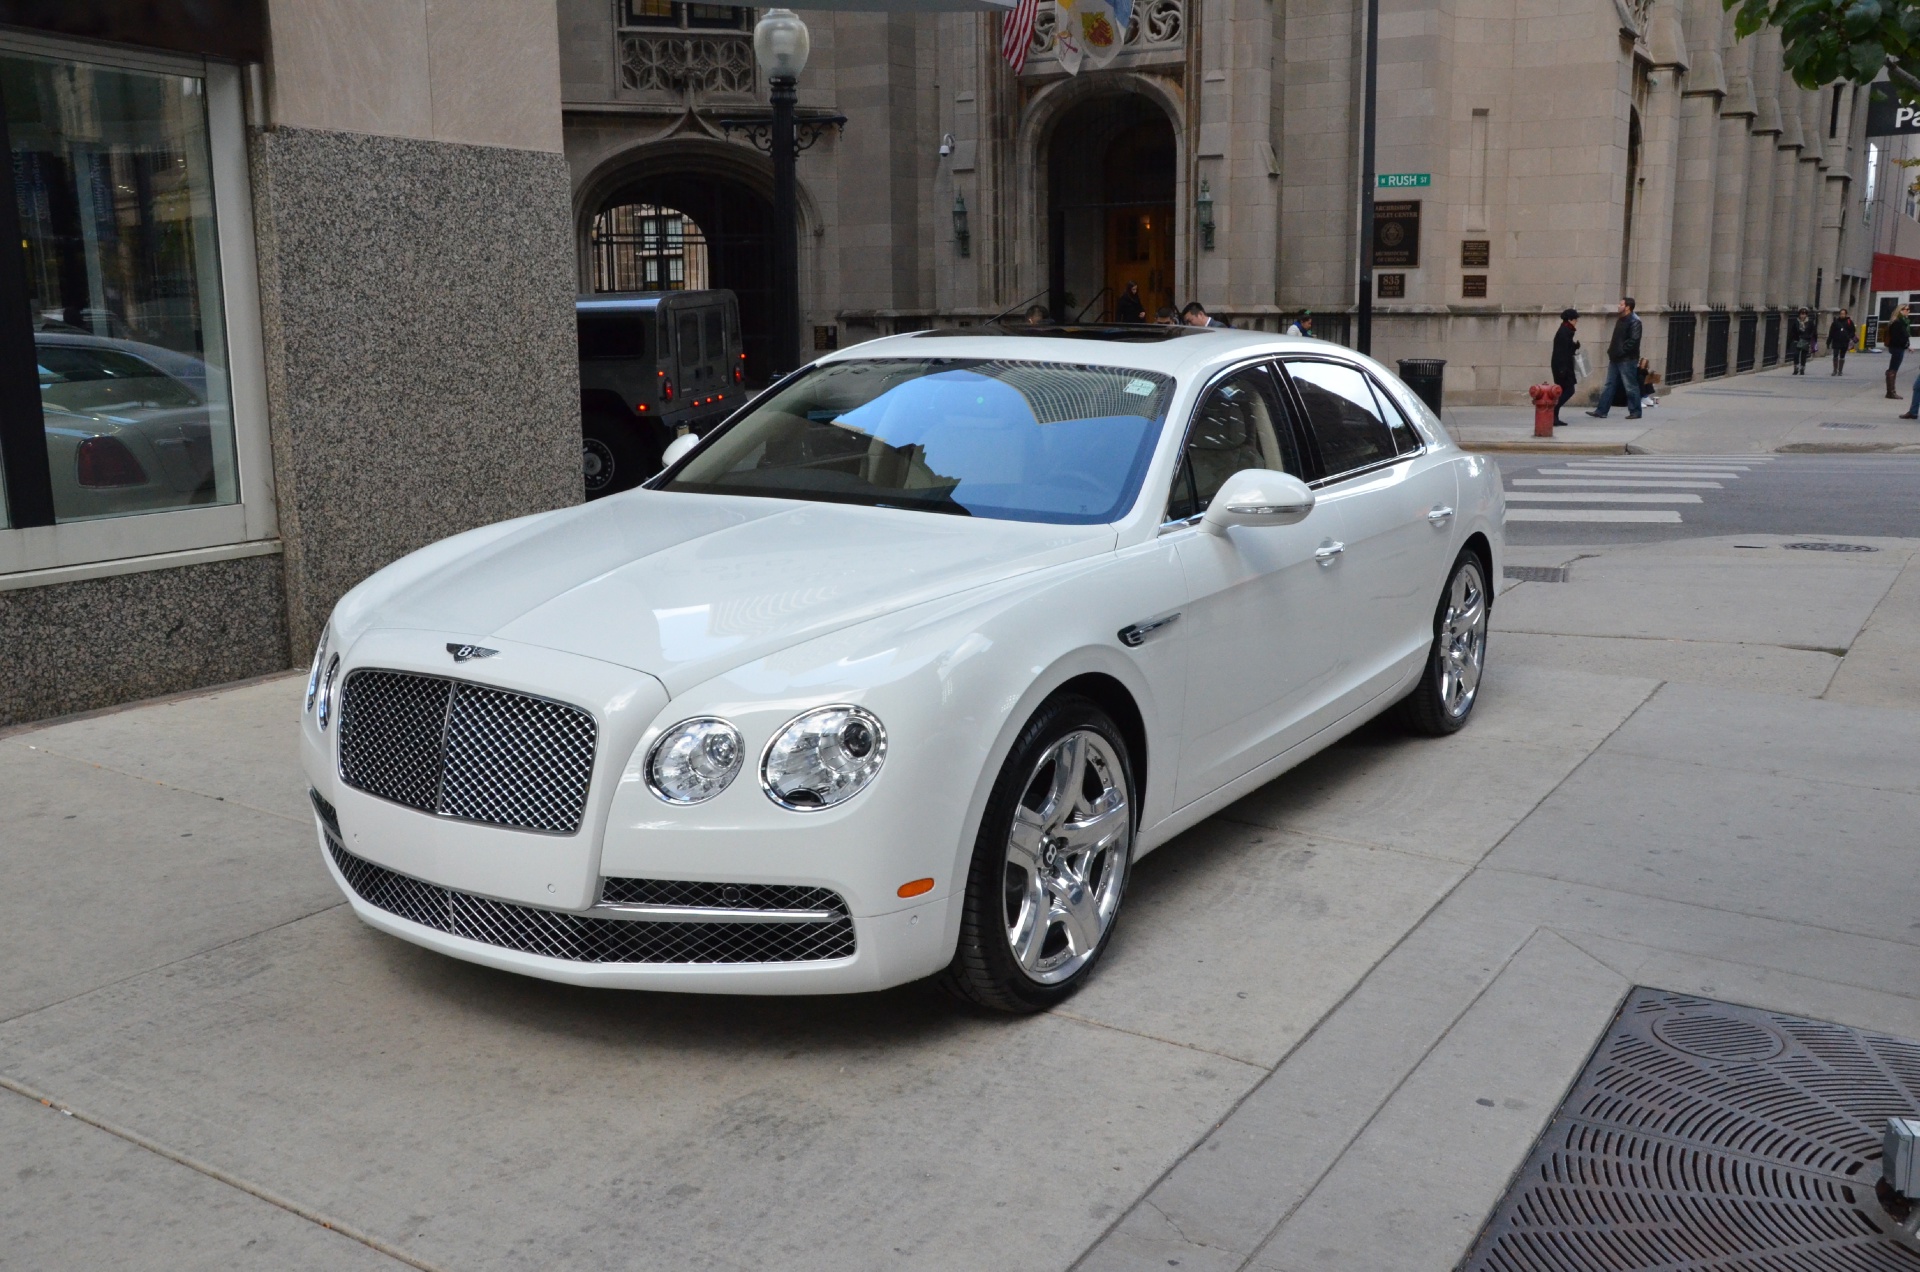 2014 Bentley Flying Spur Pics, Vehicles Collection